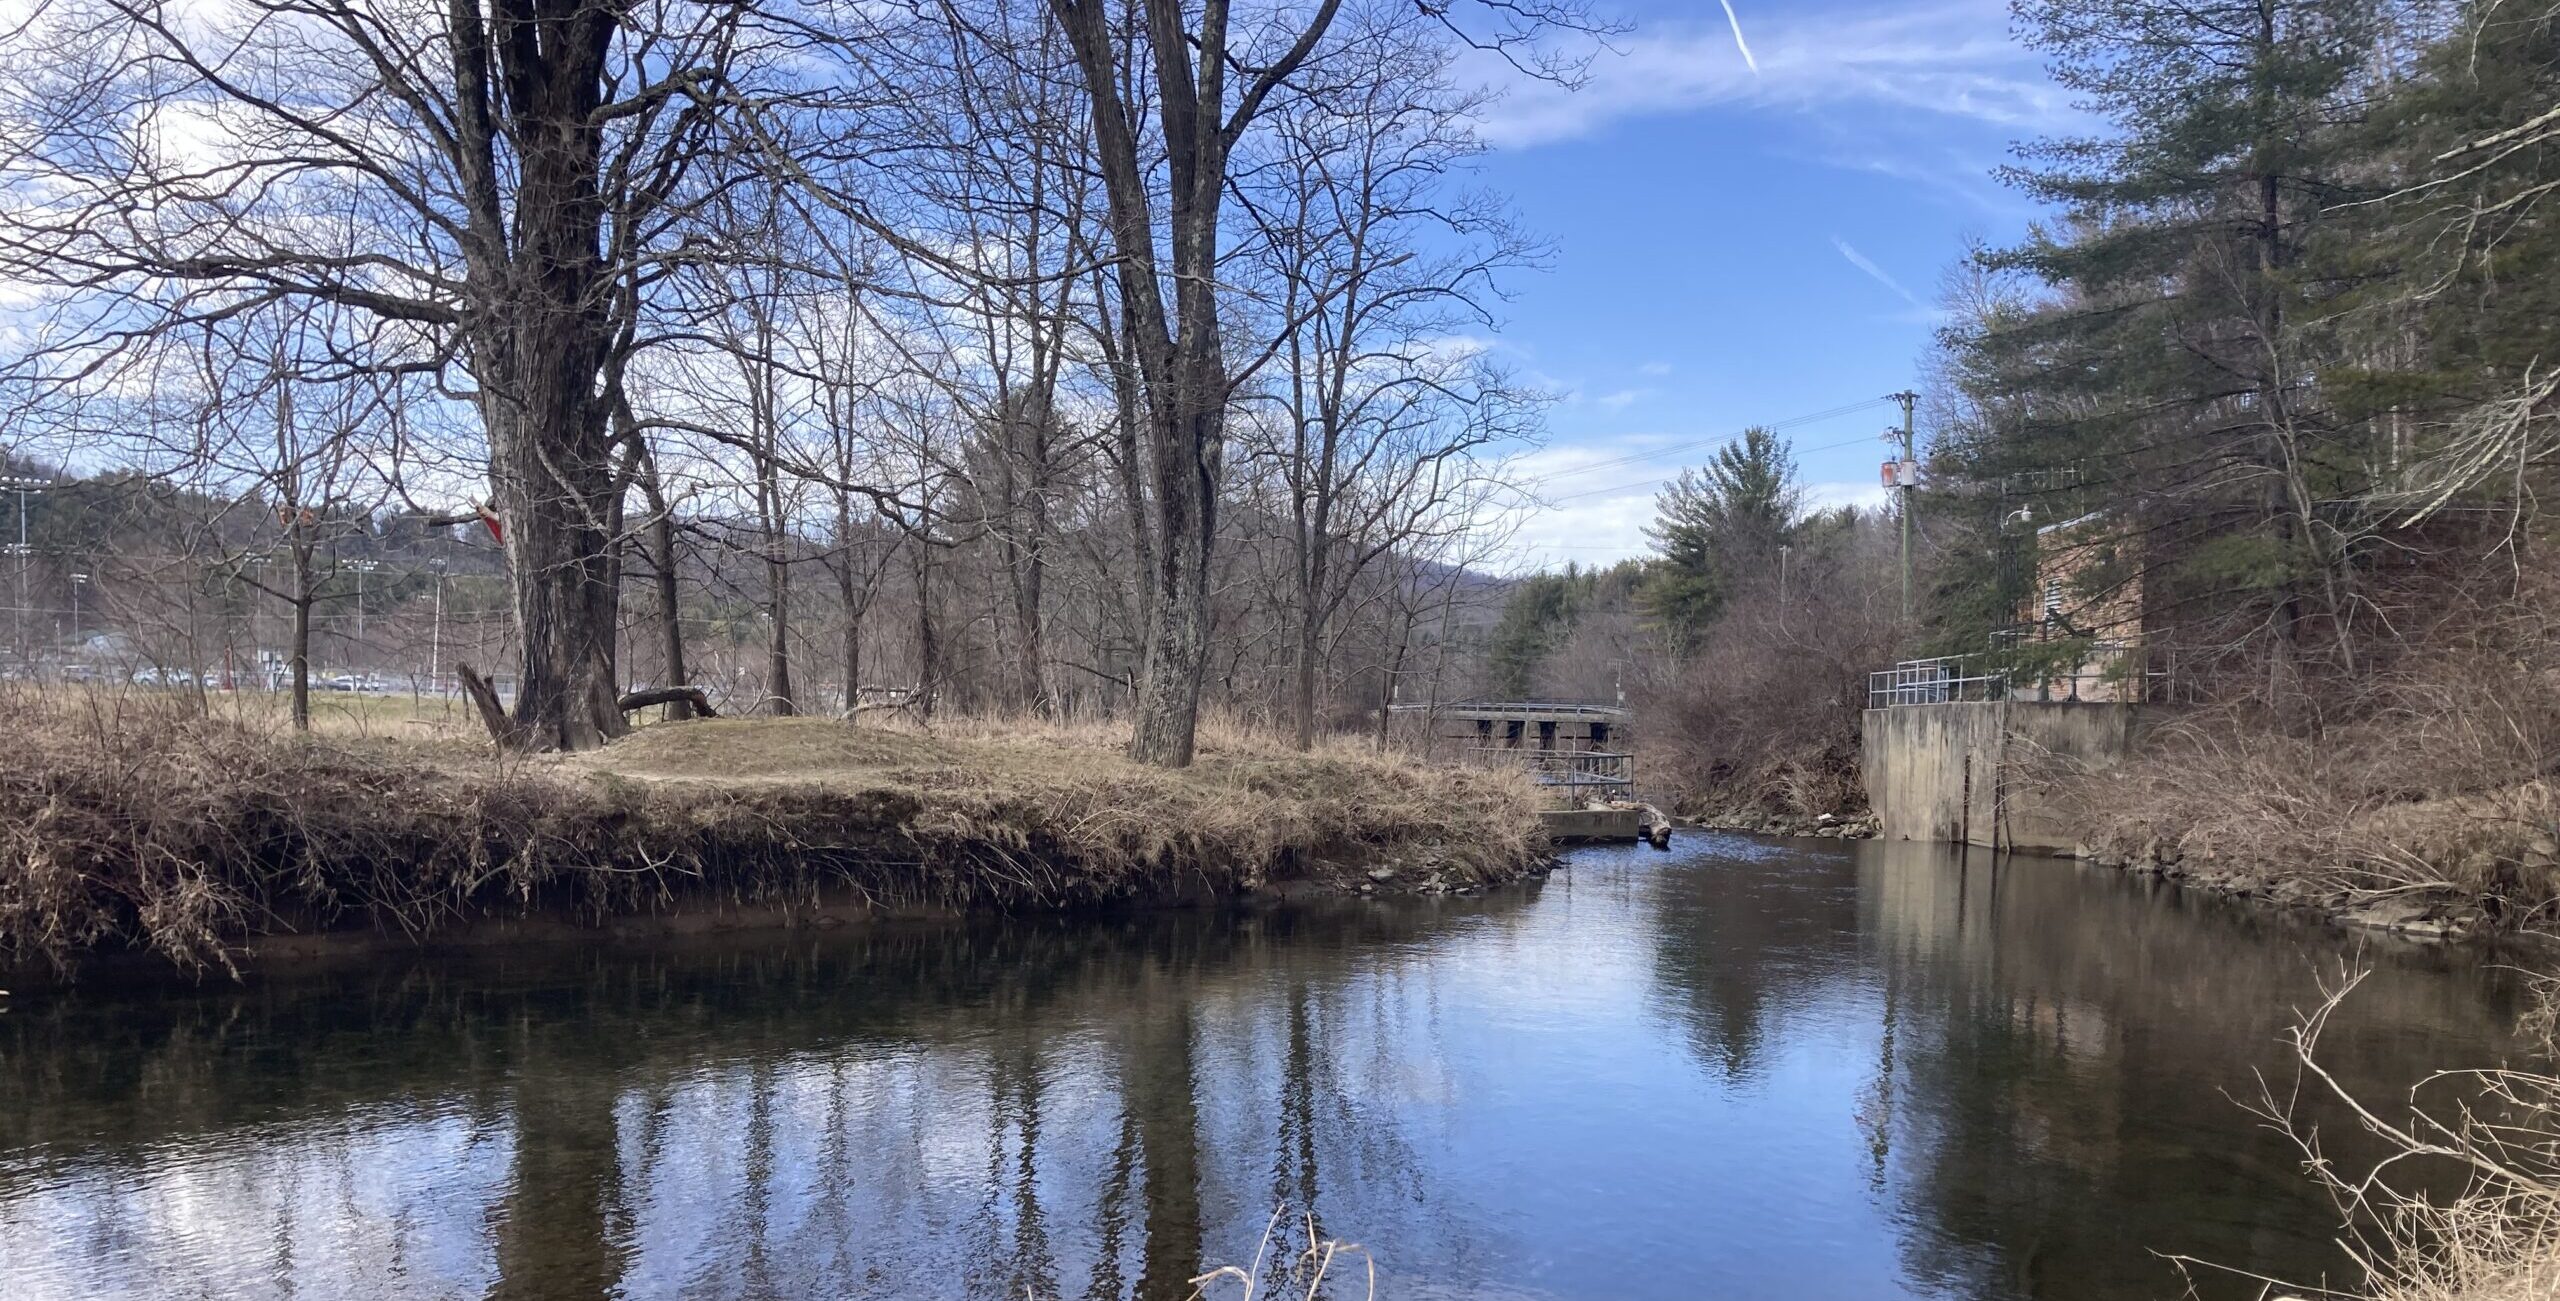 New River Conservancy awarded NC Land & Water Fund Grant for restoration work along the New River in Boone, NC